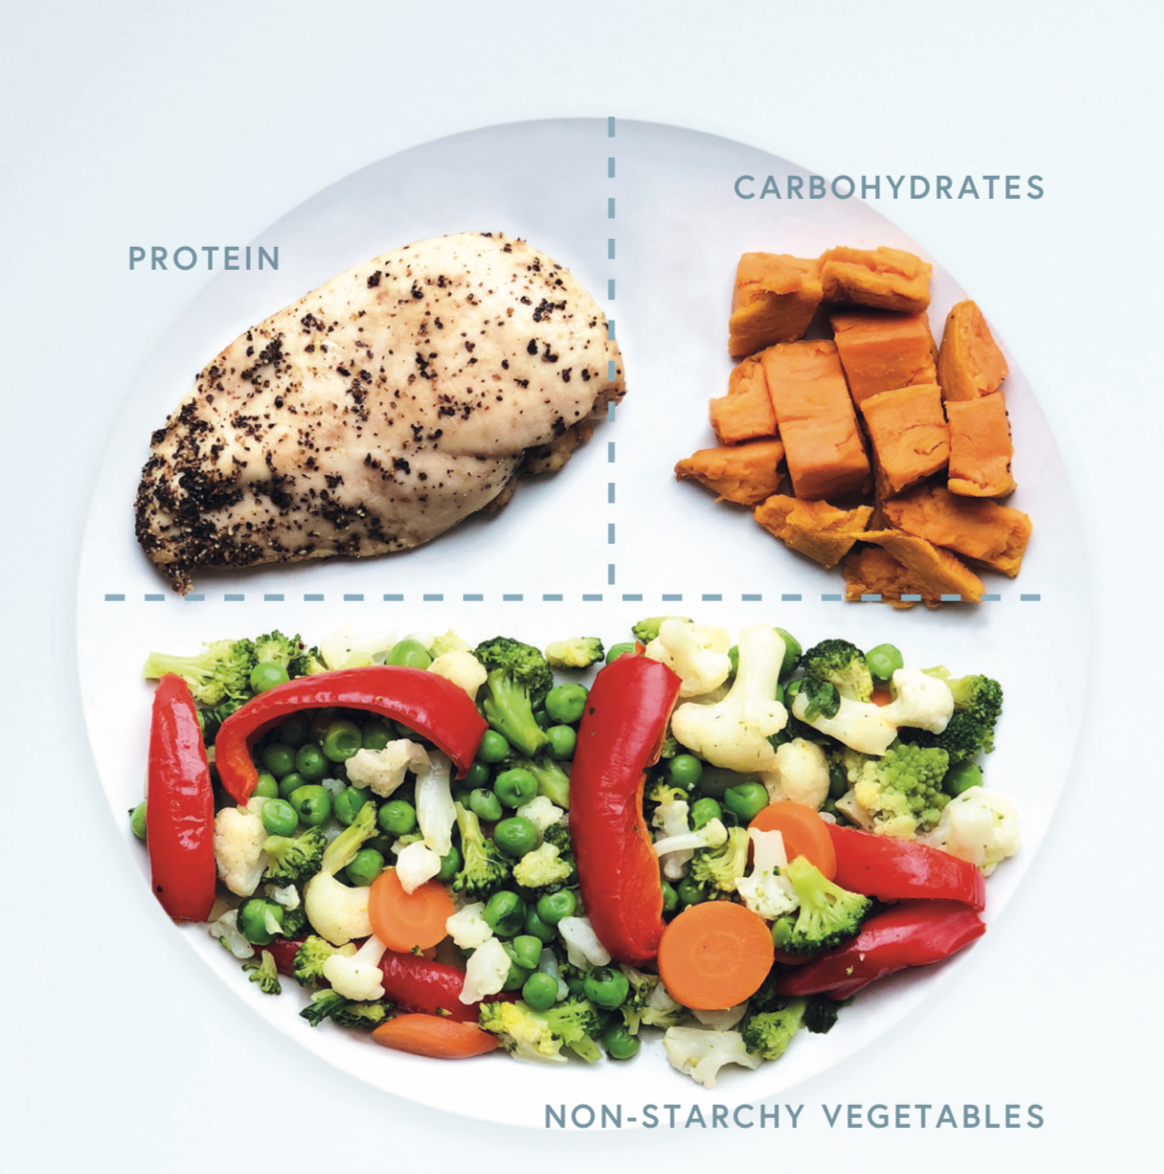 An example of a balanced plate for a carbohydrate-containing meal, including a chicken breast, ½ a baked sweet potato and 2 large handfuls of steamed non-starchy vegetables.